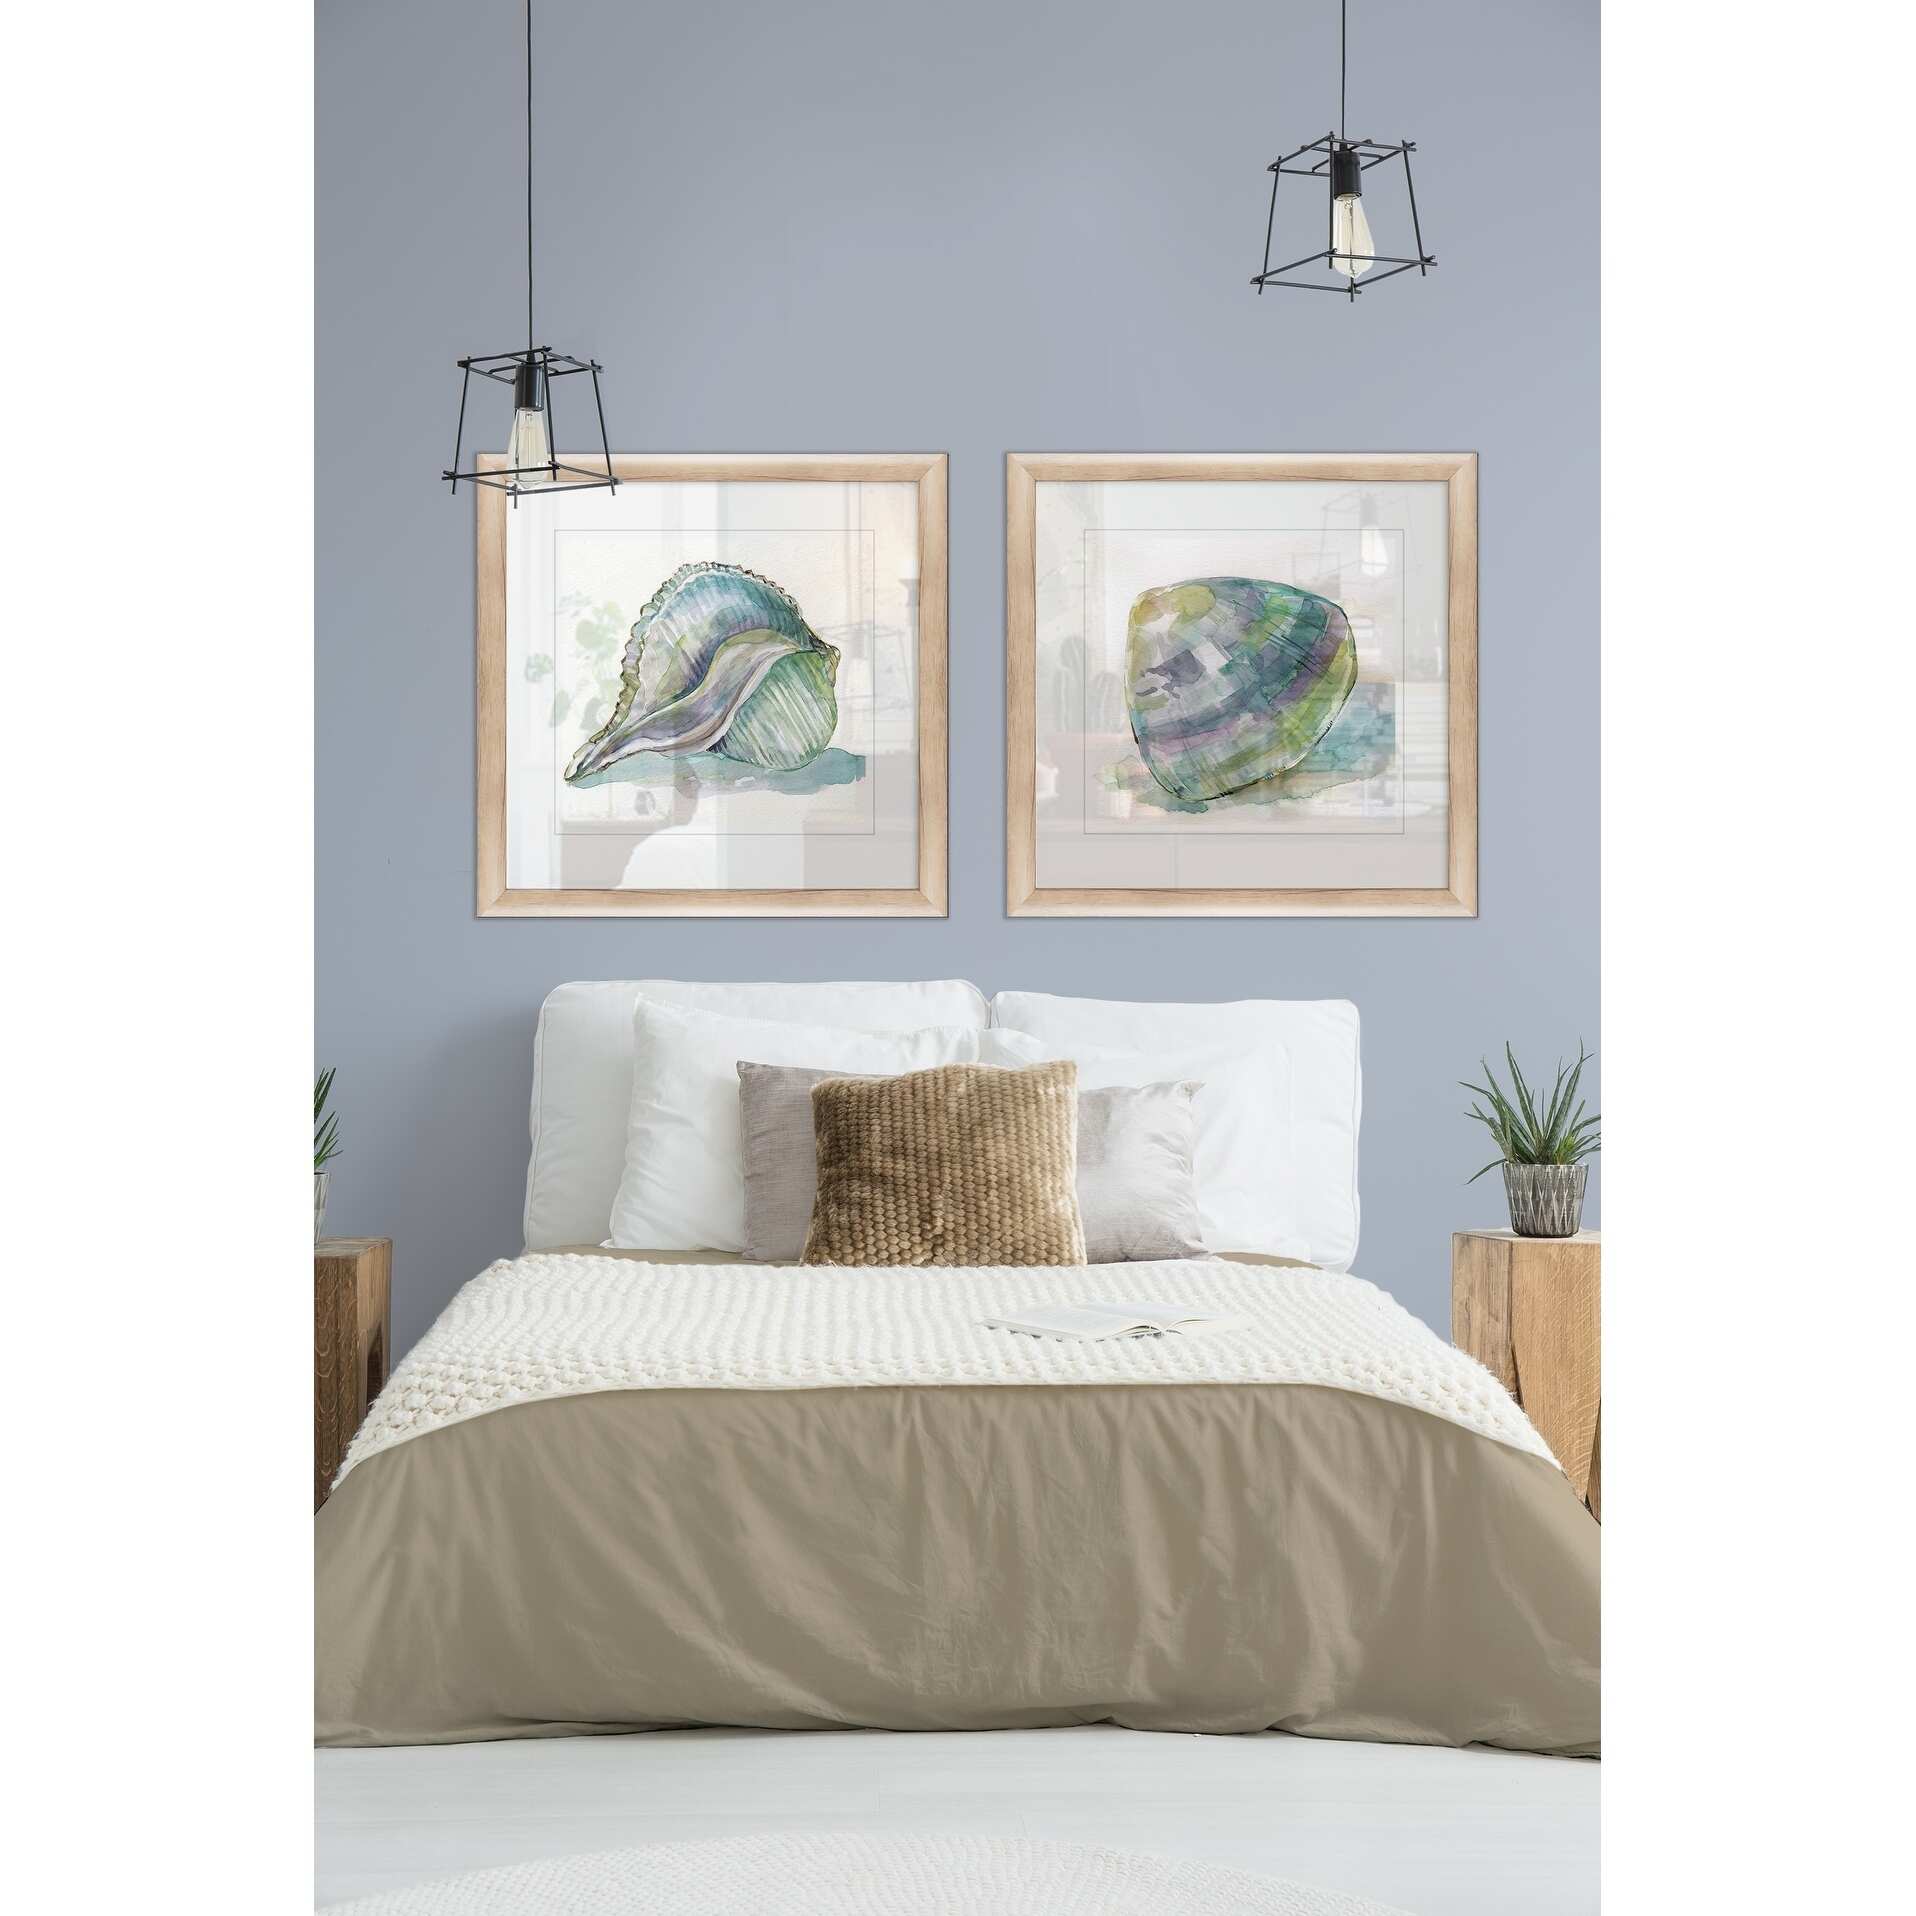 Wexford Home 'Malecon Shell I' Framed Prints (Set of 2)